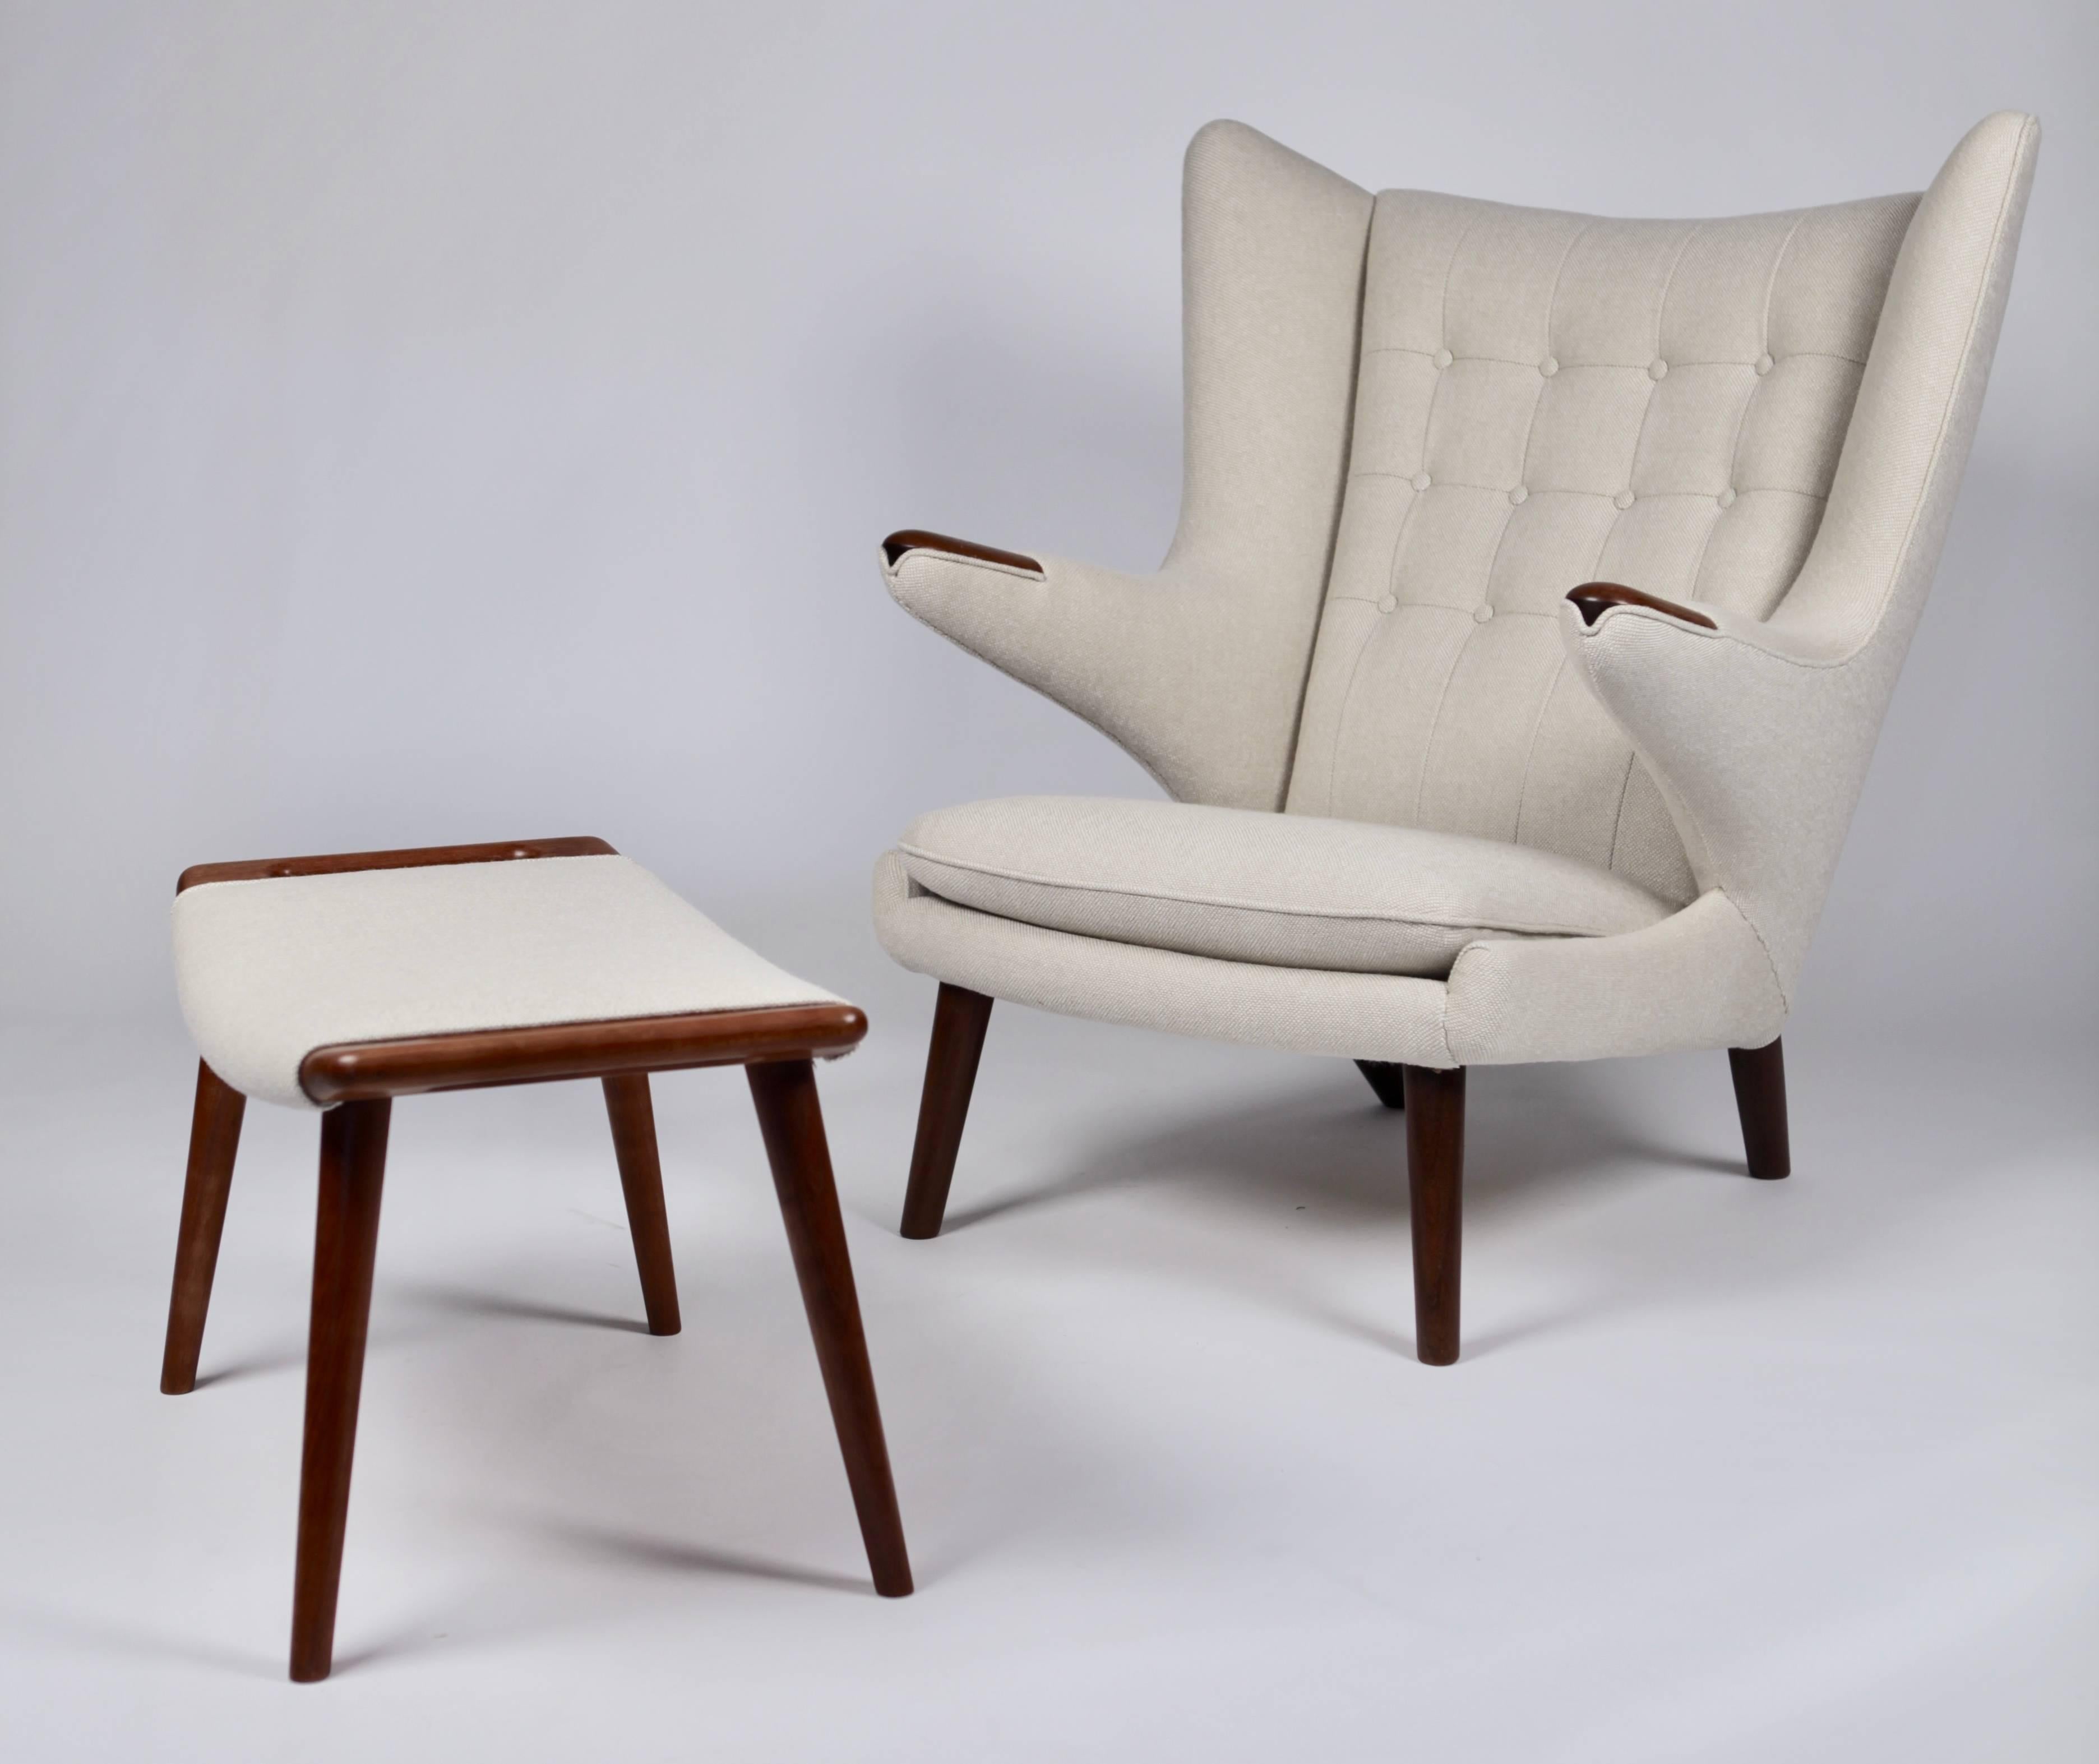 Hans J. Wegner.
Papa bear lounge chair AP 19 and footstool AP 29
Excellent restored, preserving the great patina to the teak.
New upholstered in heavy wool.
Both signed to the underside and bearing the Danish Furniture Control label.
 